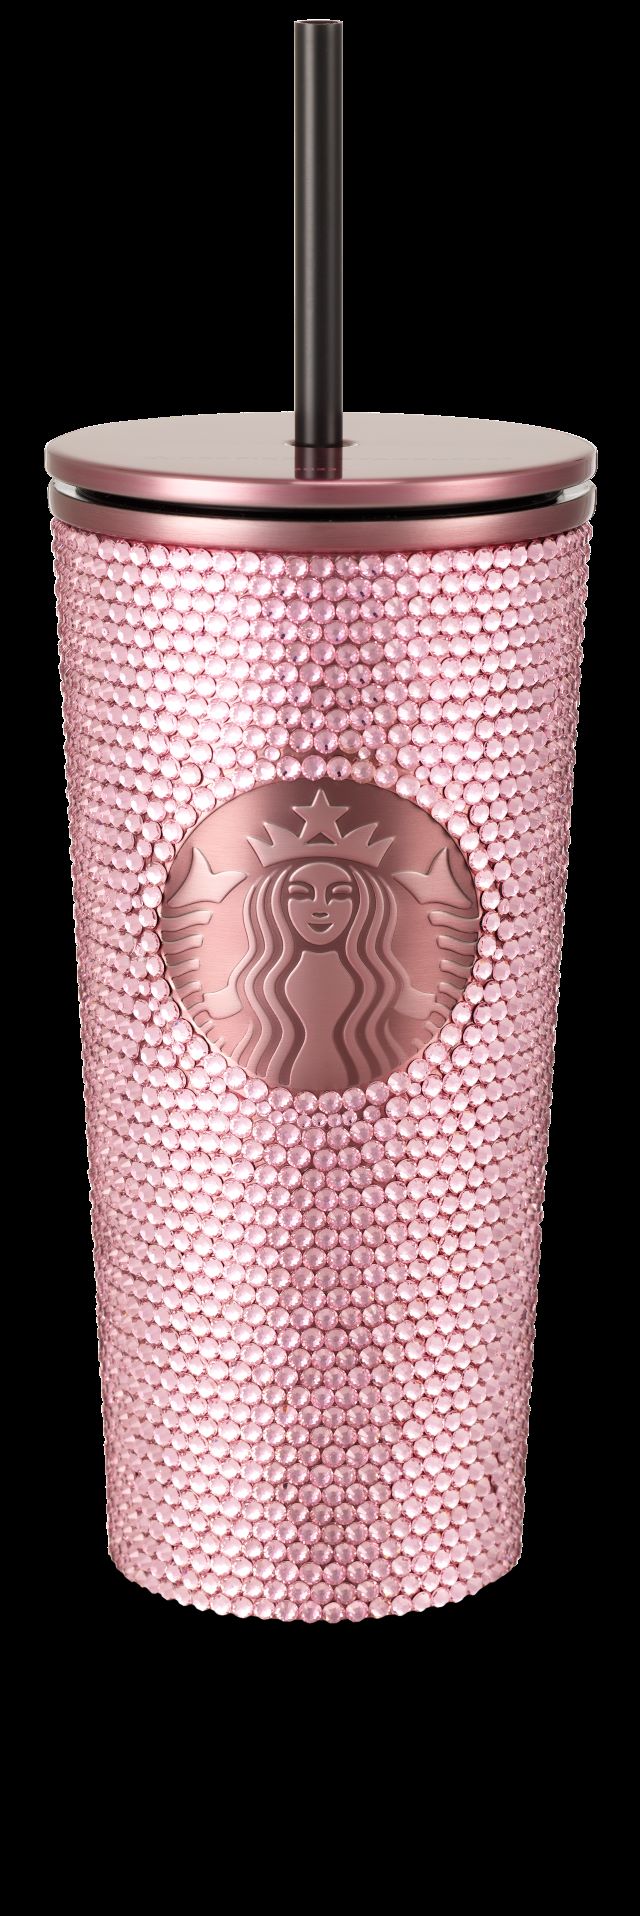 First Look at the BLACKPINK x Starbucks Collection Details, Availability